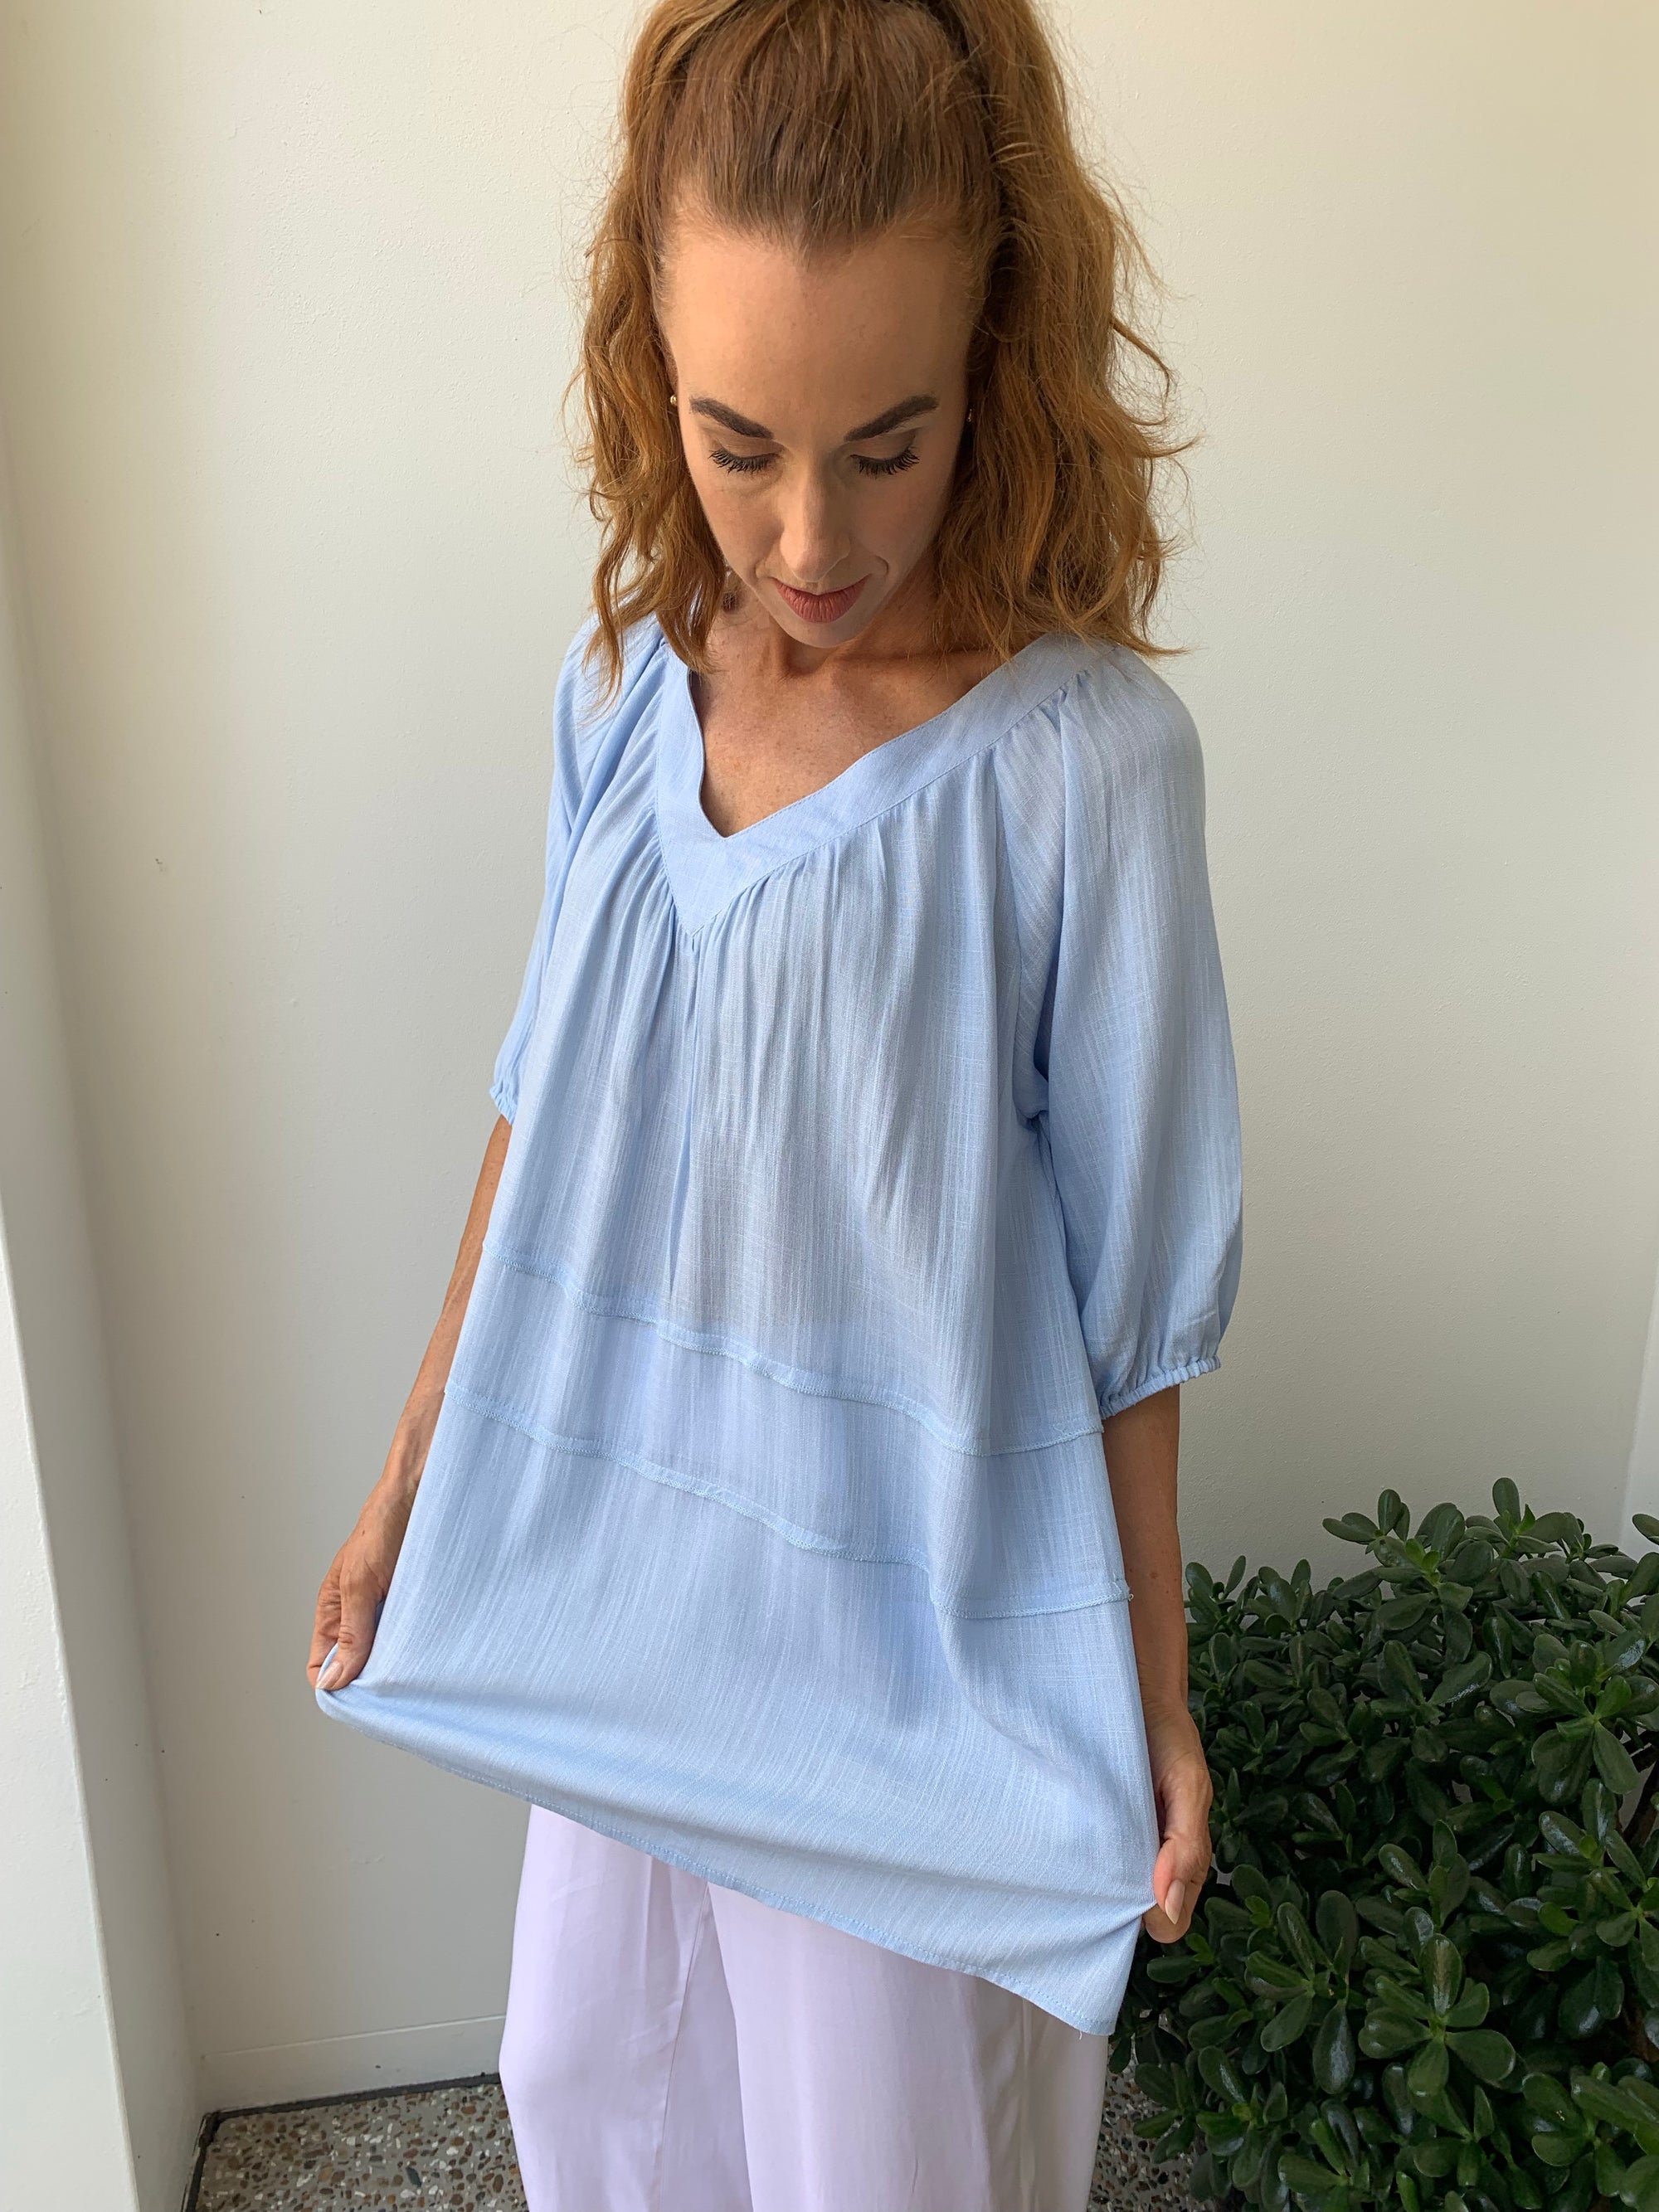 Tiered Top in Baby Blue with 1/2 Long Sleeve in Linen & Rayon - Willow Tree